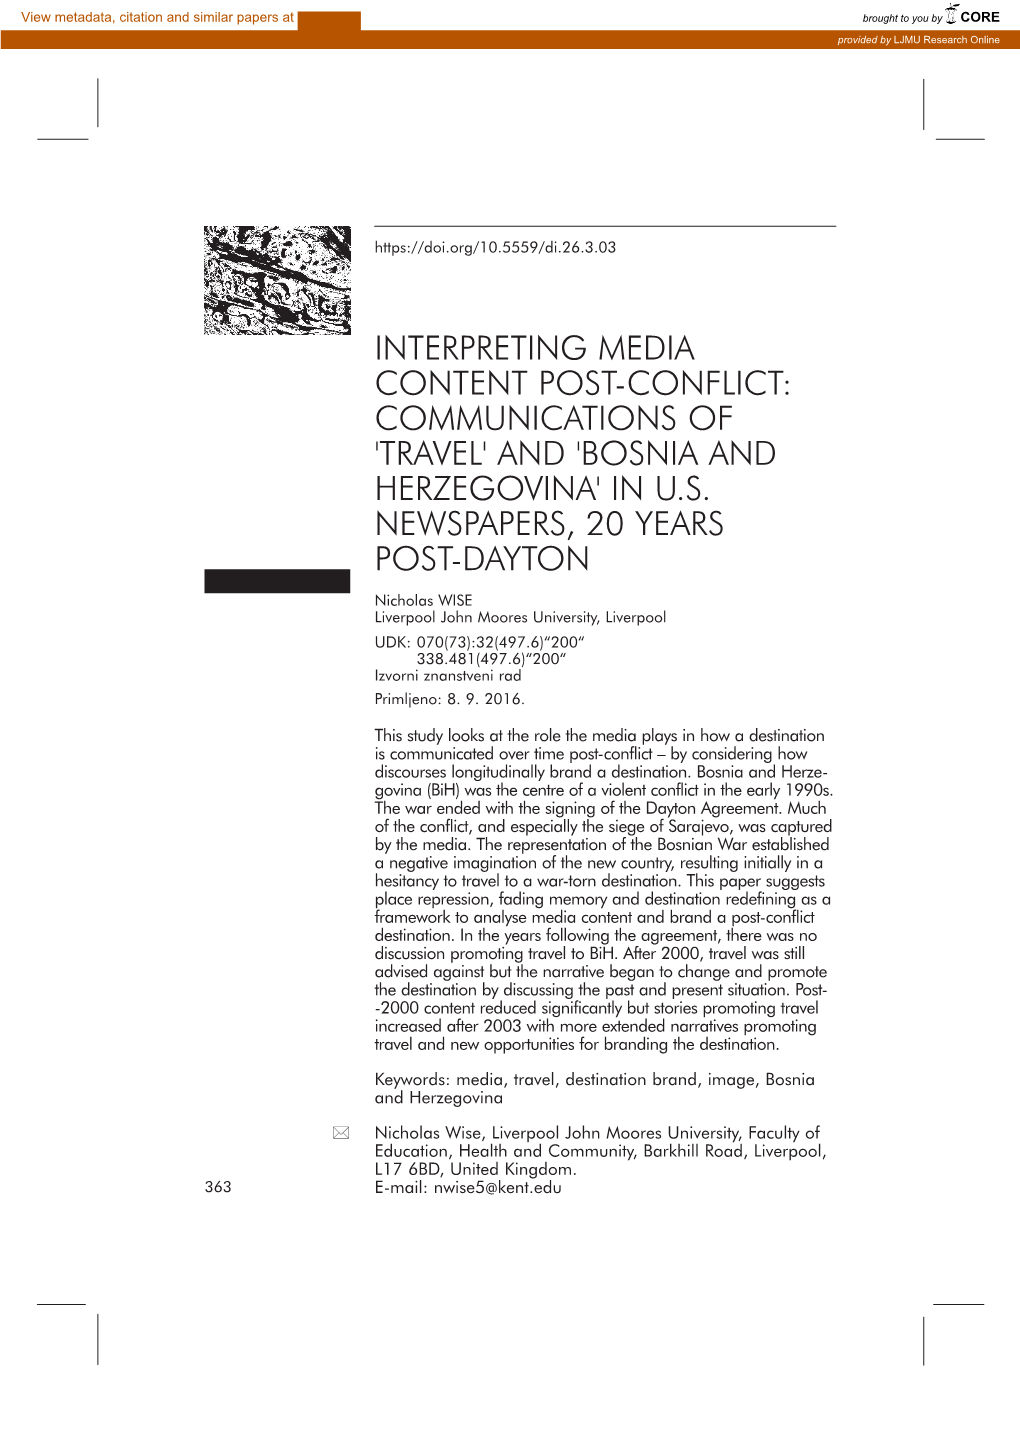 Interpreting Media Content Post-Conflict: Communications of 'Travel' and 'Bosnia and Herzegovina' in U.S